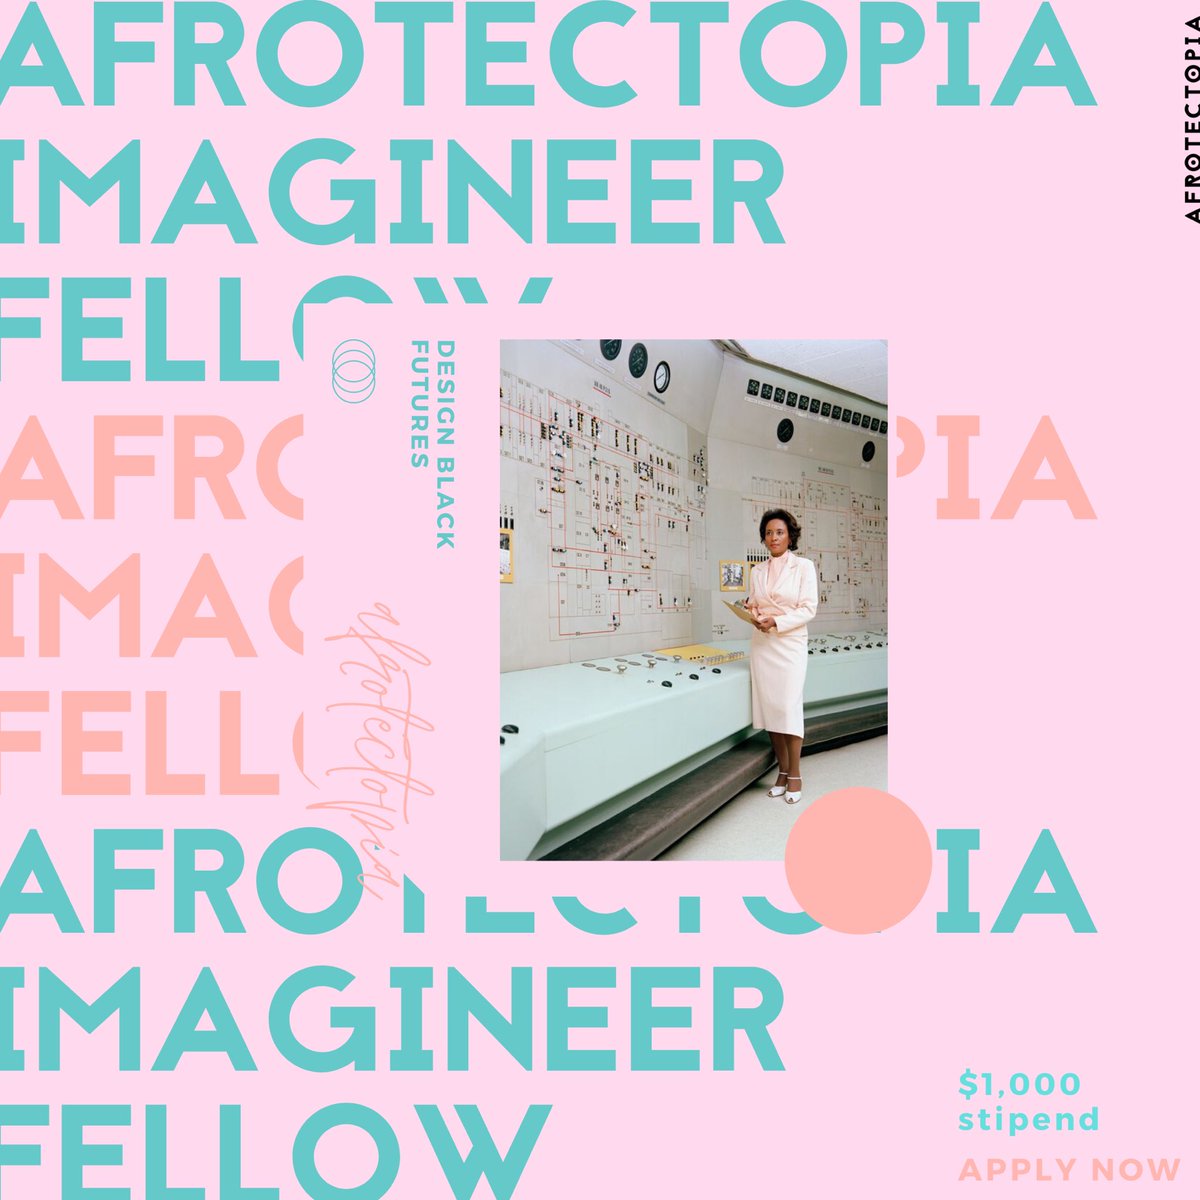 And we are invested in the interdisciplinary and collaborate effort of speculative design and imagination for healthy Black futures. Apply to our Imagineer Fellowship at  https://www.afrotectopia.org/imagineer-fellowship